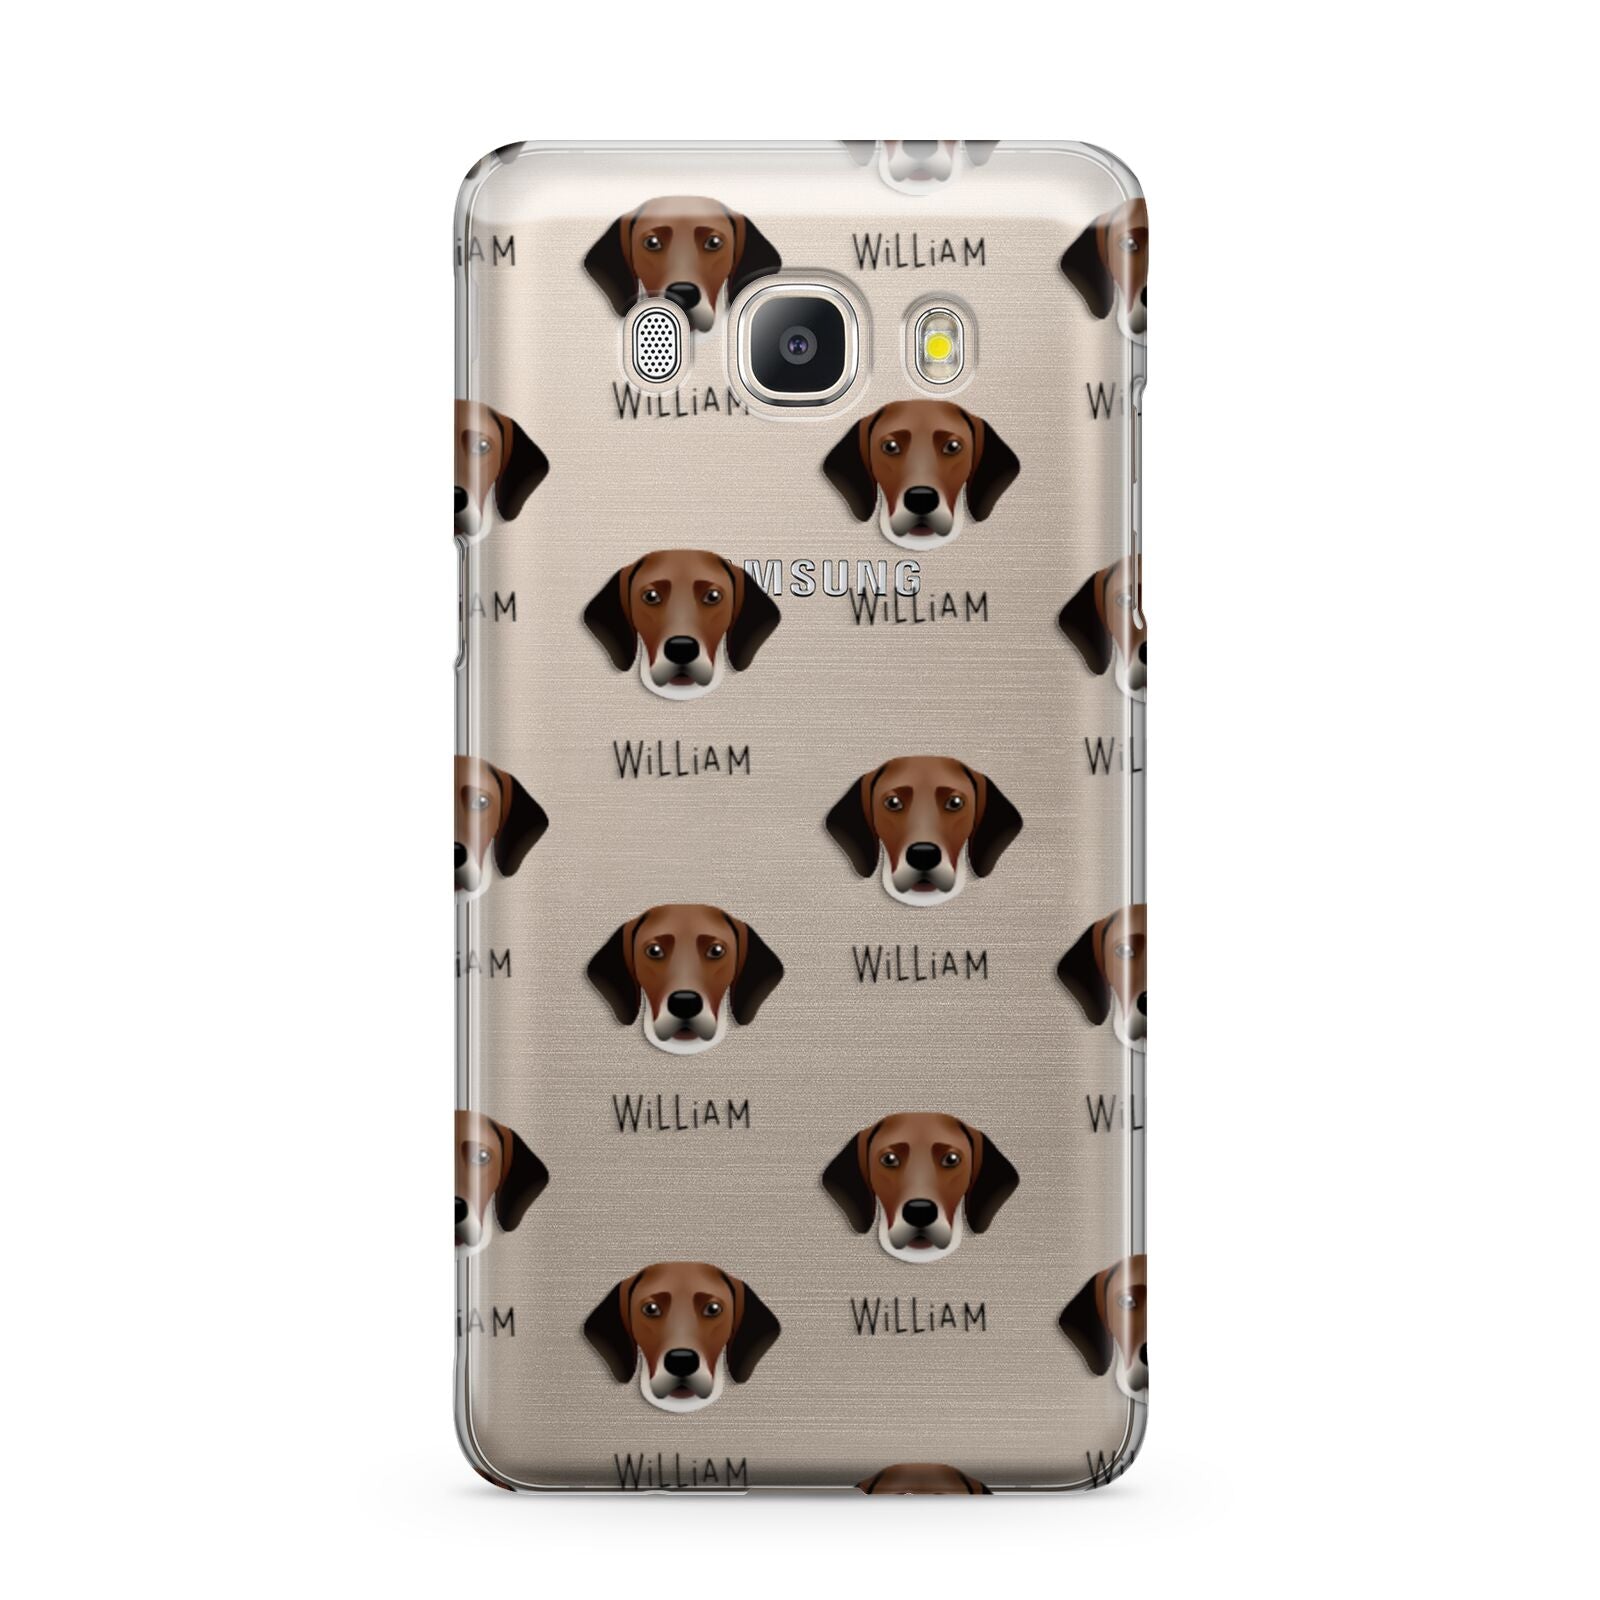 Harrier Icon with Name Samsung Galaxy J5 2016 Case